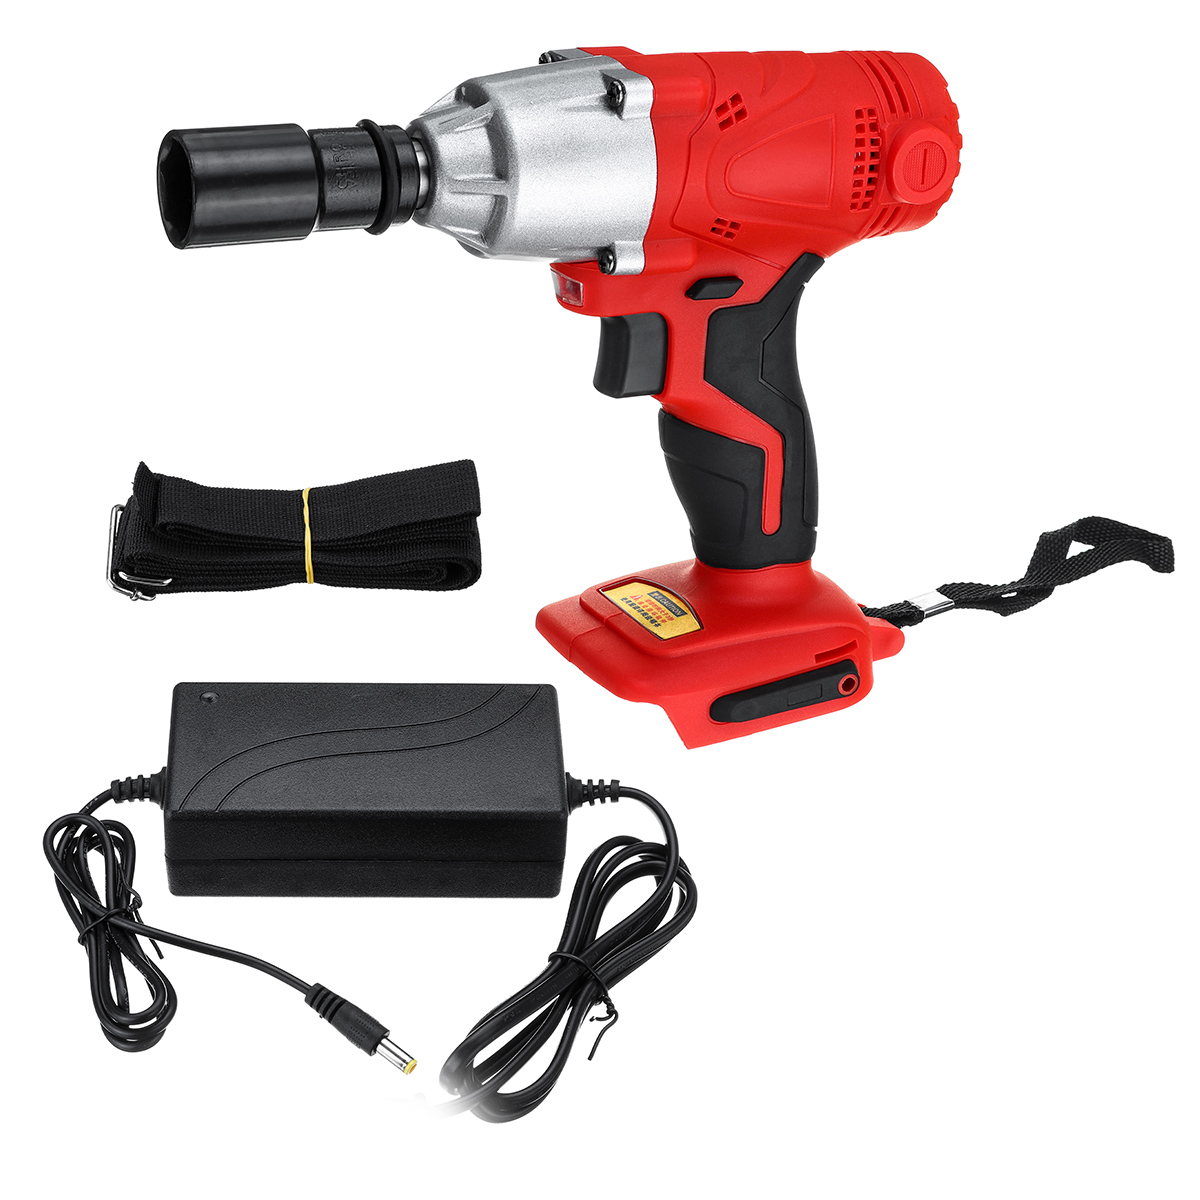 180V-240V-Cordless-LED-Light-Impact-Wrench-50Hz-350-Nm-Waterproof-Electric-Wrench-Adapted-To-18V-Mak-1590254-9